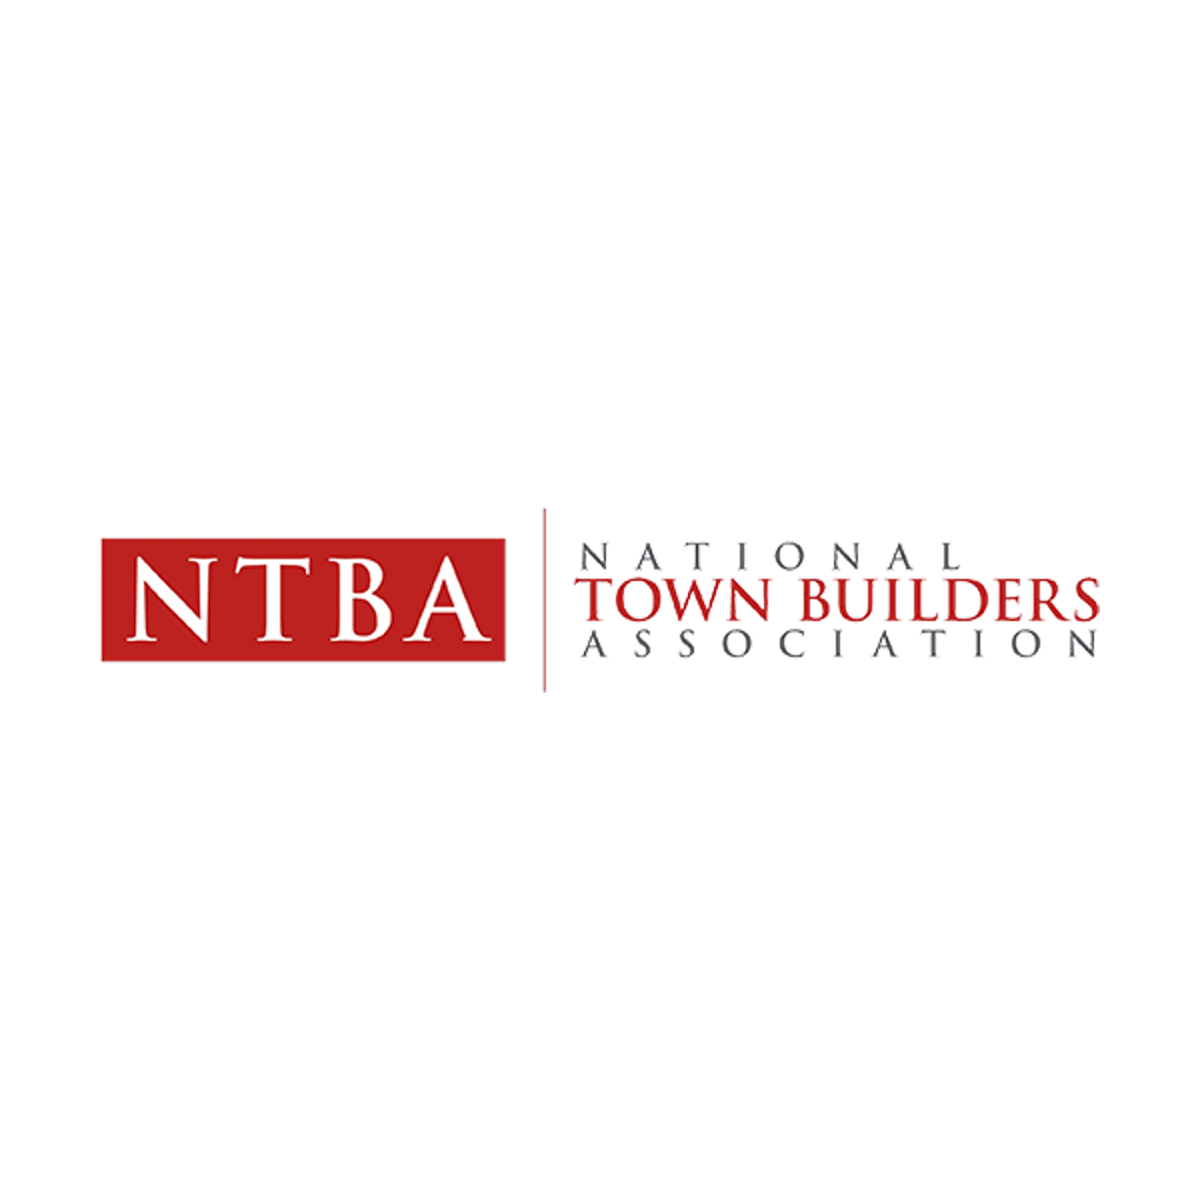 NTBA logo - white letters on red background.